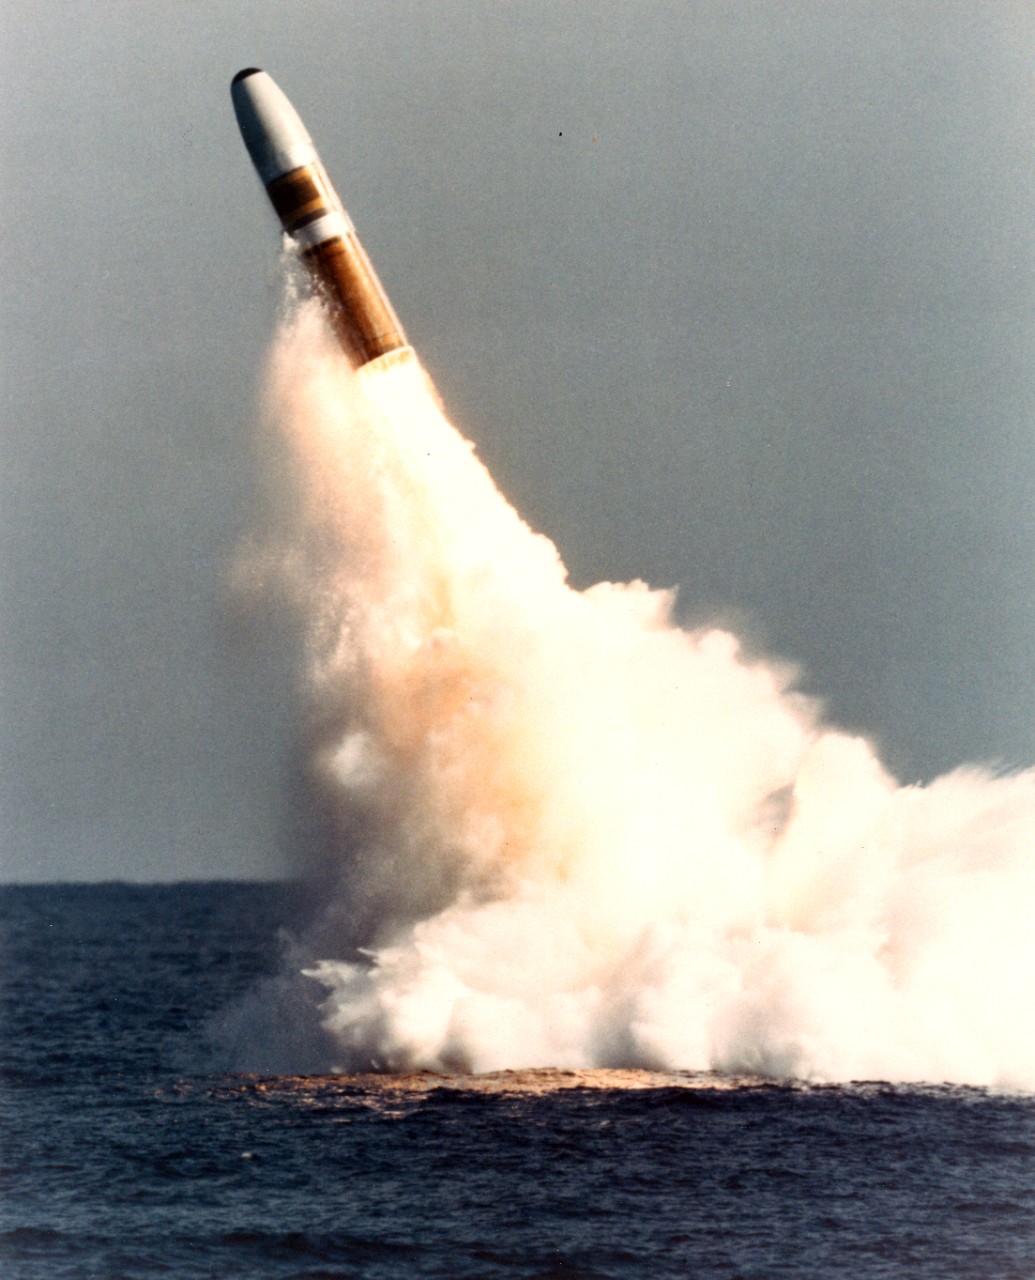 L55-19-06-02: Trident 1, C-4. The missile breaks the surface while being launched.